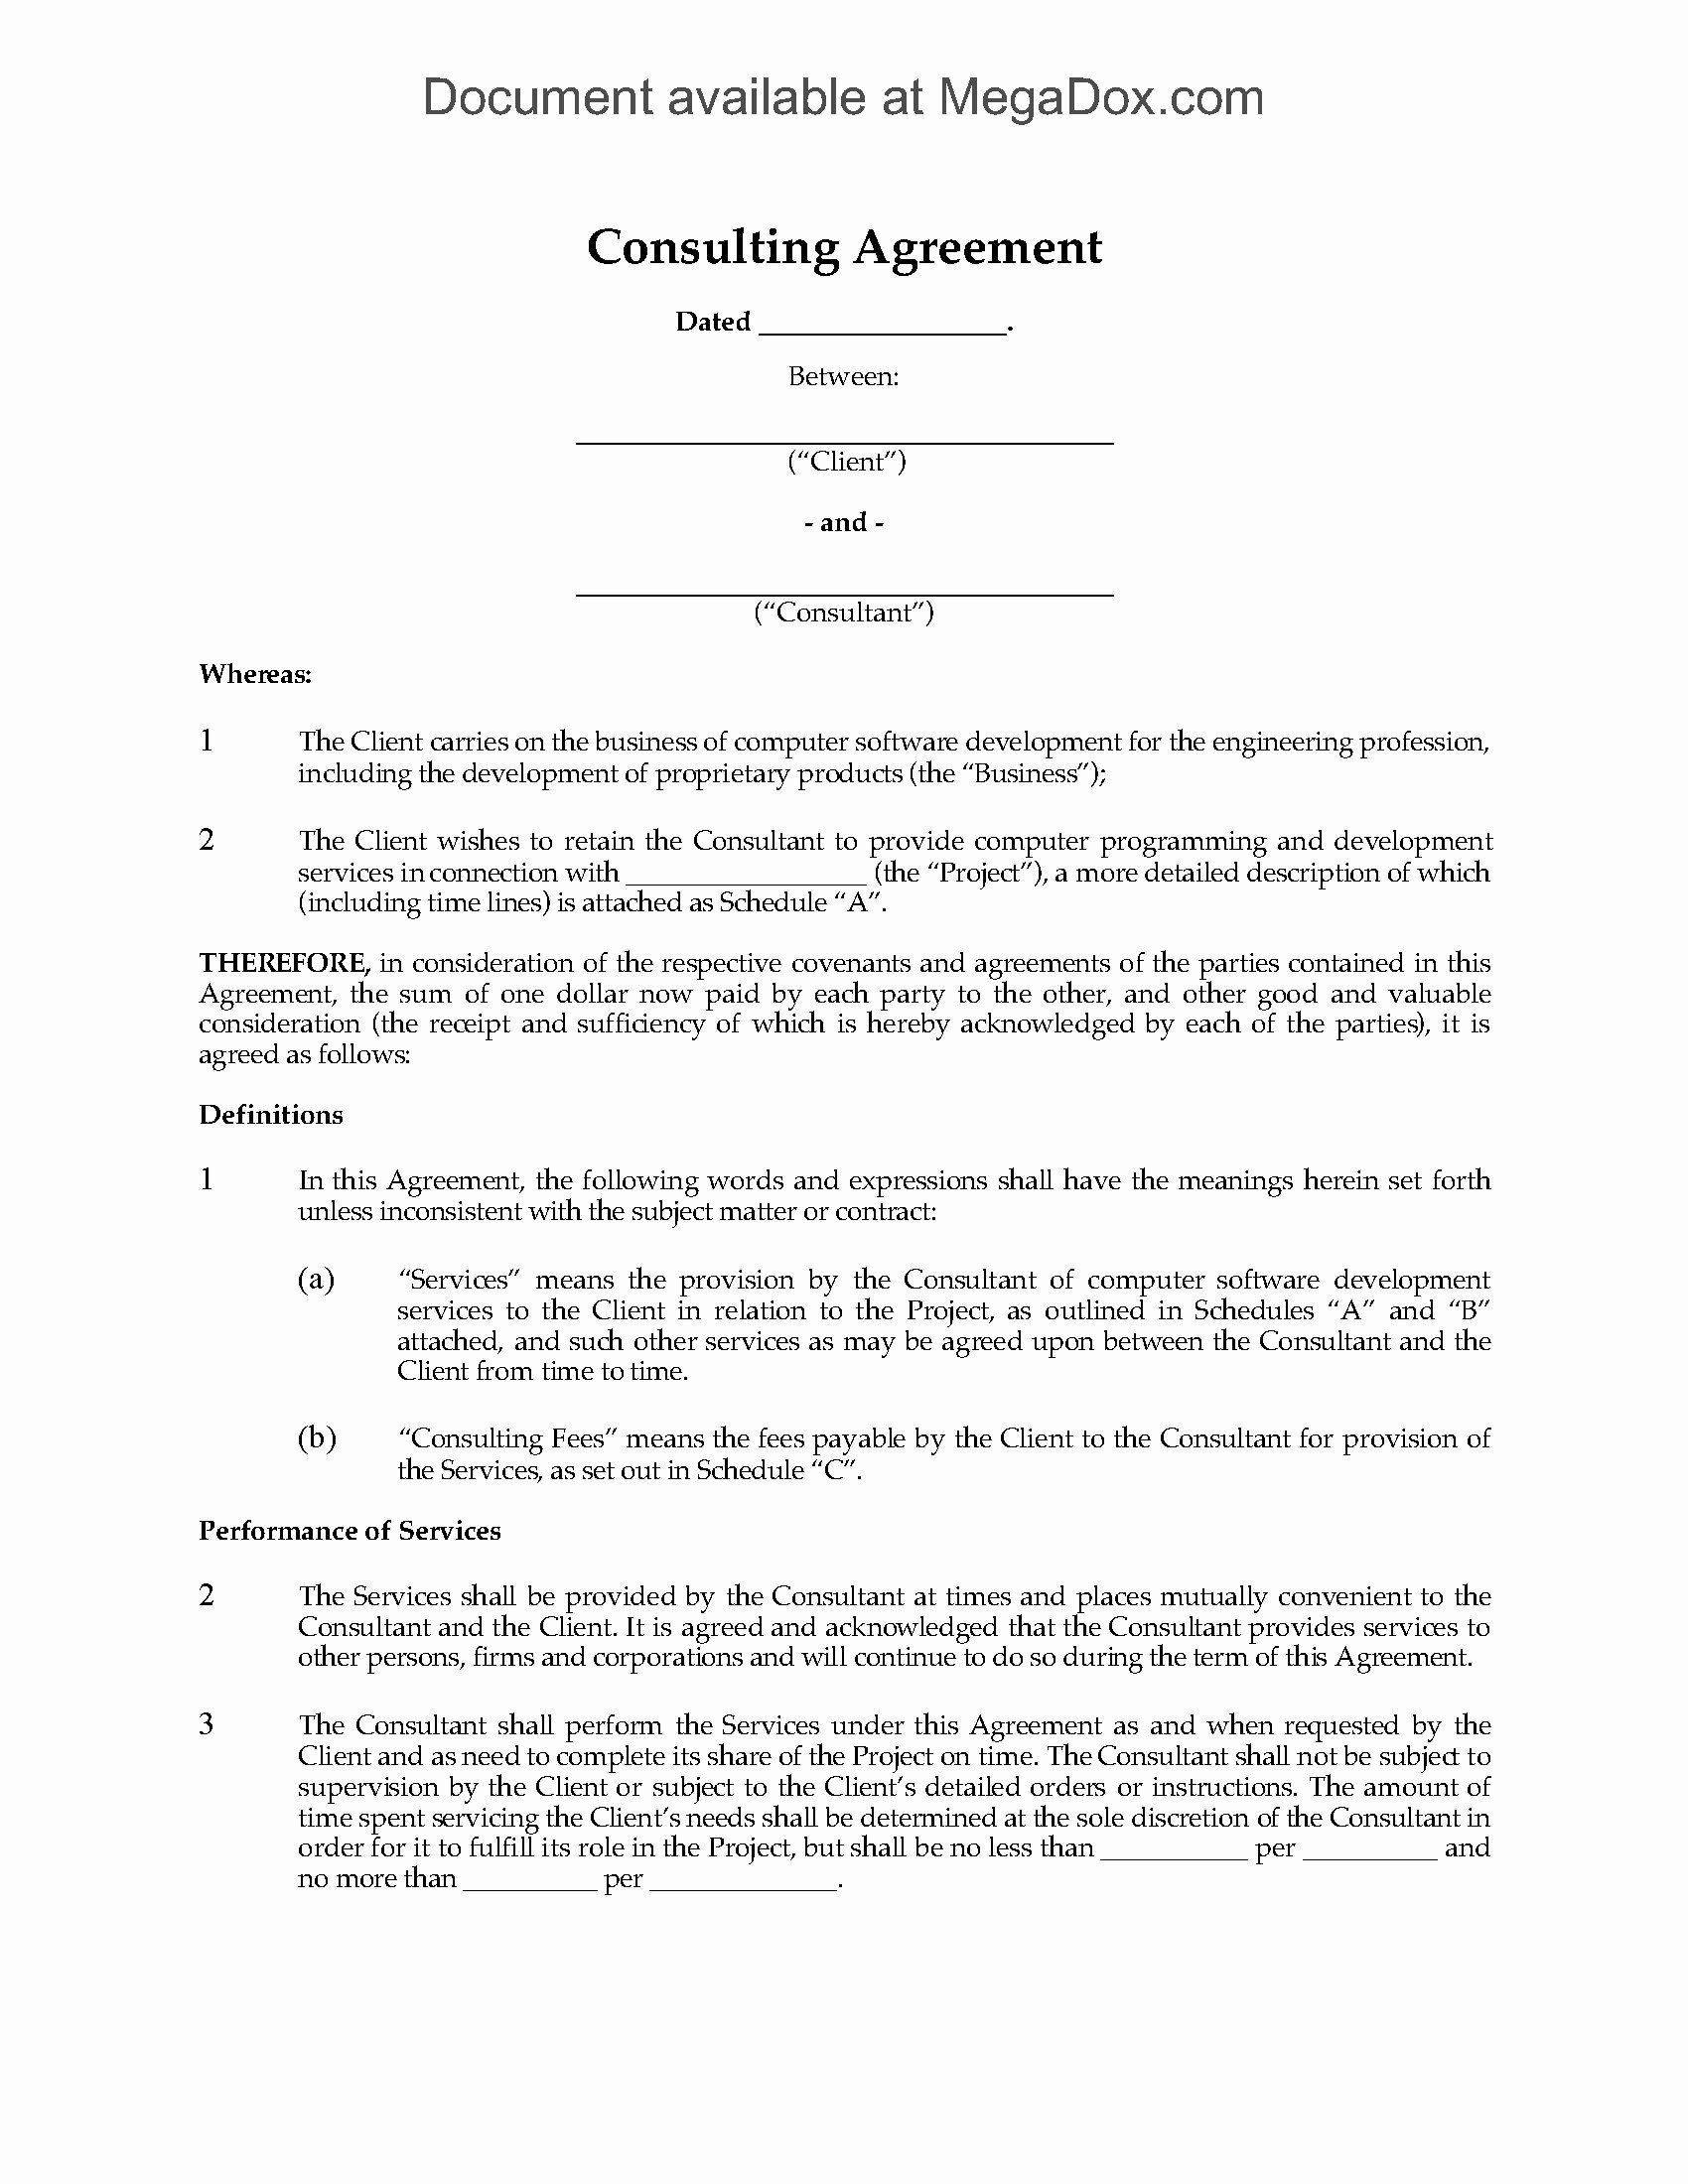 Consulting Contract Template Free Inspirational Canada Consulting Agreement for software Development